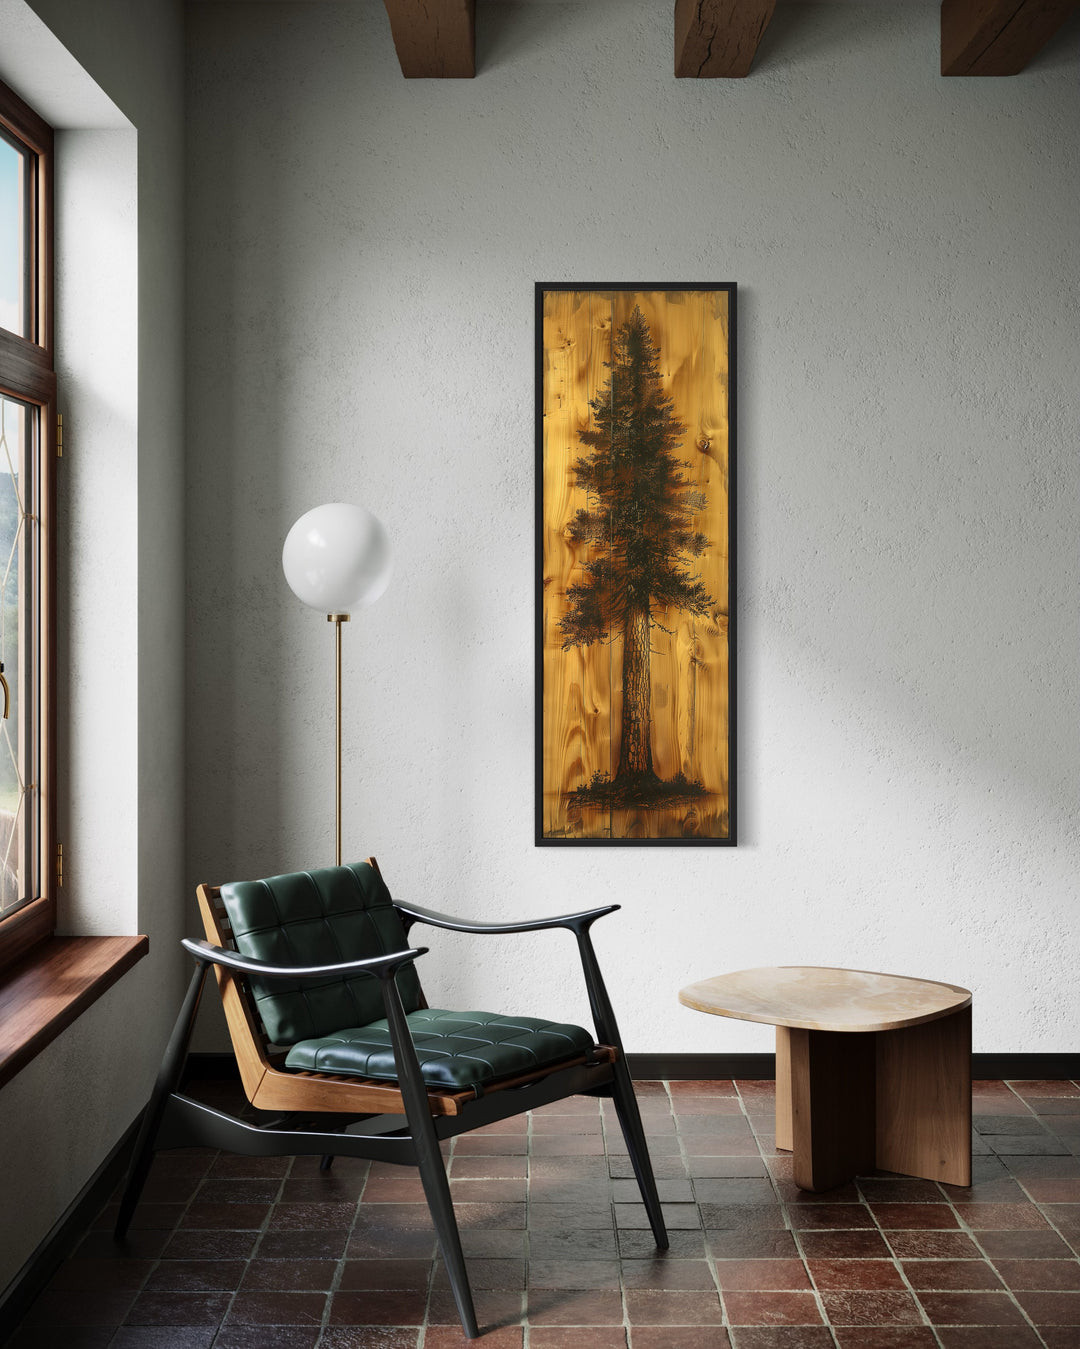 Tall Narrow Pine Tree Painted On Wood Slice Cabin Vertical Decor in modern room